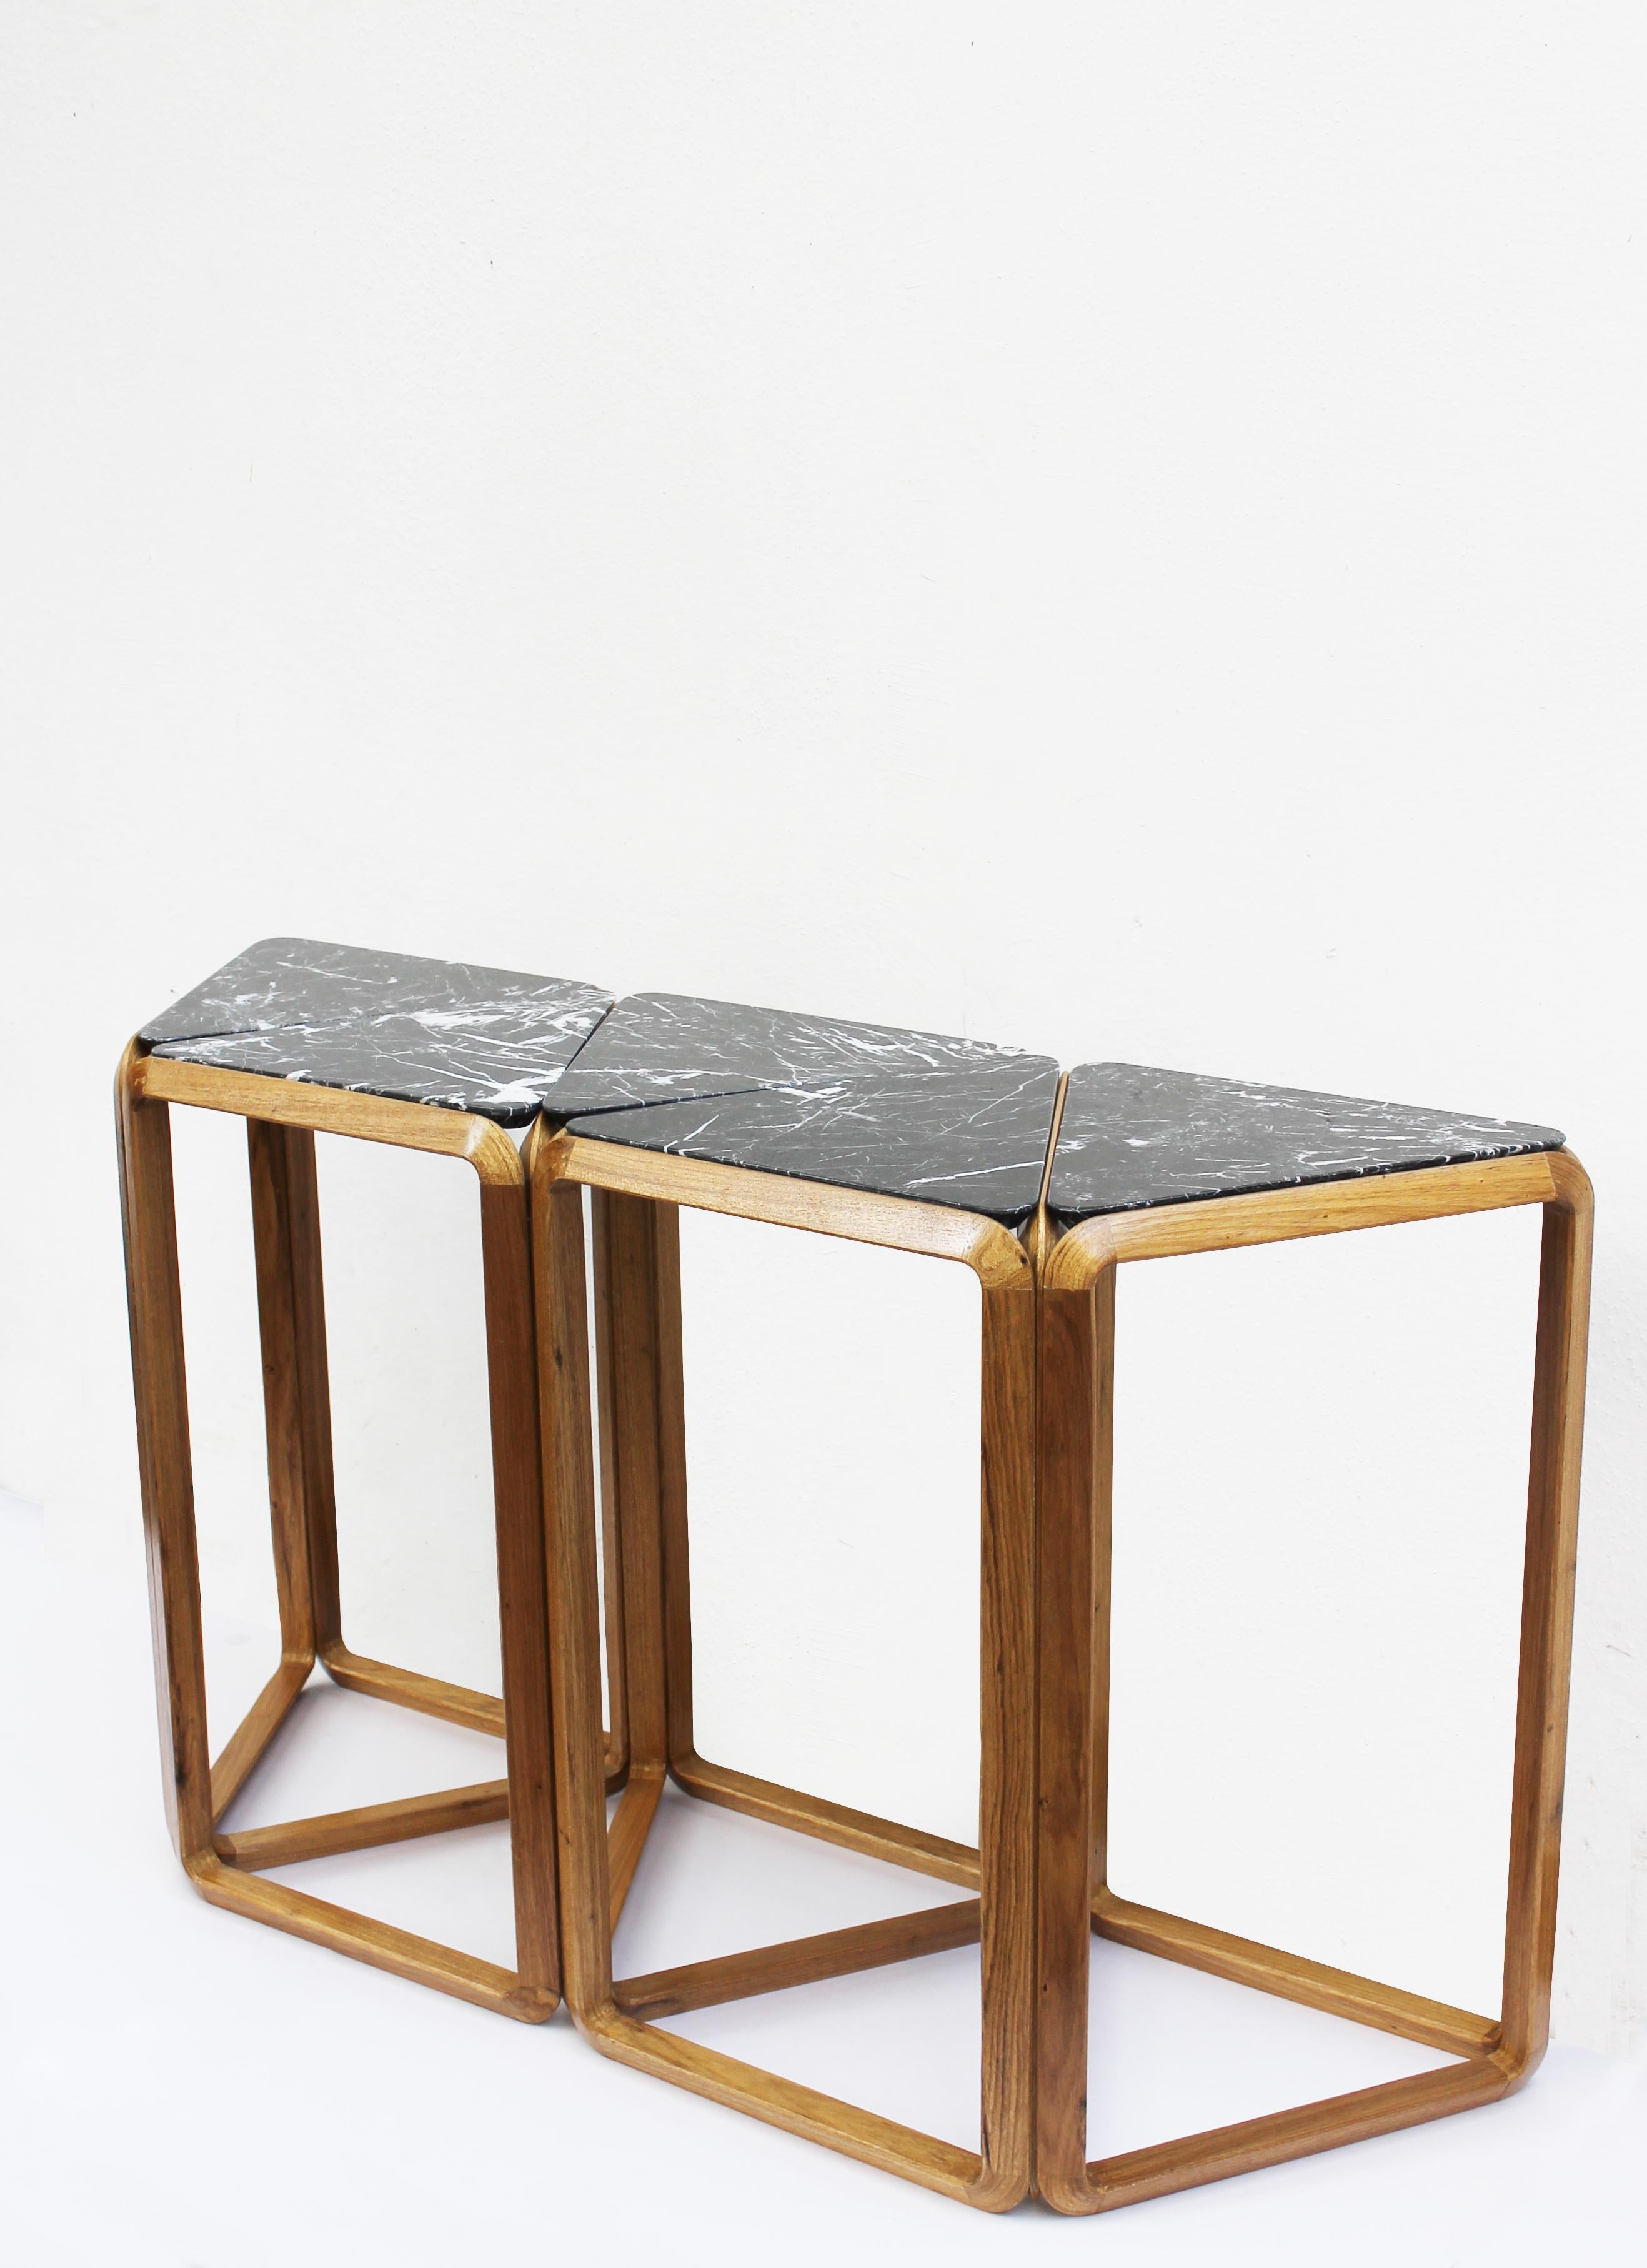 Wood (Brazilian freijó) and Marble (spanish nero marquina) Console table - five tops

Base of Brazilian Freijó wood and loose tops in marble nero marquina.
Although a solid object, the emptiness is also part and give name to the collection - void